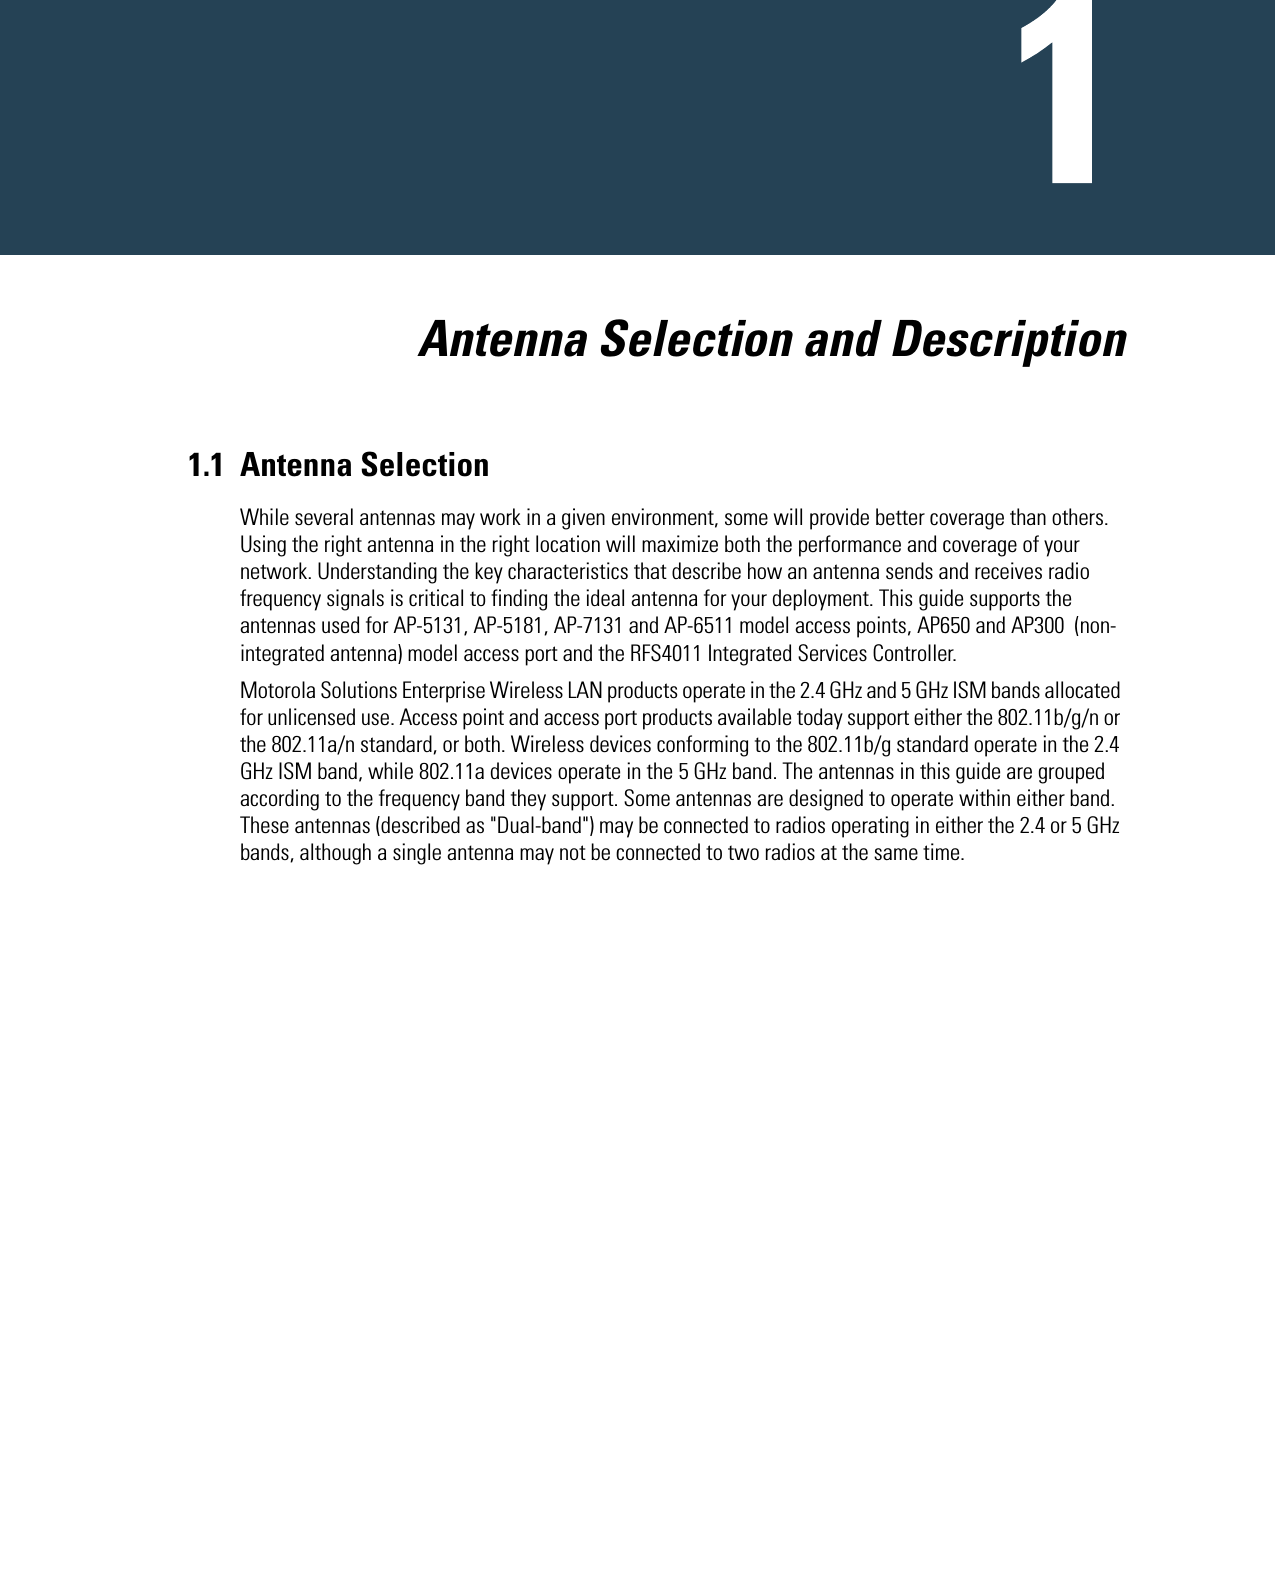   Antenna Selection and Description1.1 Antenna SelectionWhile several antennas may work in a given environment, some will provide better coverage than others. Using the right antenna in the right location will maximize both the performance and coverage of your network. Understanding the key characteristics that describe how an antenna sends and receives radio frequency signals is critical to finding the ideal antenna for your deployment. This guide supports the antennas used for AP-5131, AP-5181, AP-7131 and AP-6511 model access points, AP650 and AP300  (non-integrated antenna) model access port and the RFS4011 Integrated Services Controller.Motorola Solutions Enterprise Wireless LAN products operate in the 2.4 GHz and 5 GHz ISM bands allocated for unlicensed use. Access point and access port products available today support either the 802.11b/g/n or the 802.11a/n standard, or both. Wireless devices conforming to the 802.11b/g standard operate in the 2.4 GHz ISM band, while 802.11a devices operate in the 5 GHz band. The antennas in this guide are grouped according to the frequency band they support. Some antennas are designed to operate within either band. These antennas (described as &quot;Dual-band&quot;) may be connected to radios operating in either the 2.4 or 5 GHz bands, although a single antenna may not be connected to two radios at the same time.